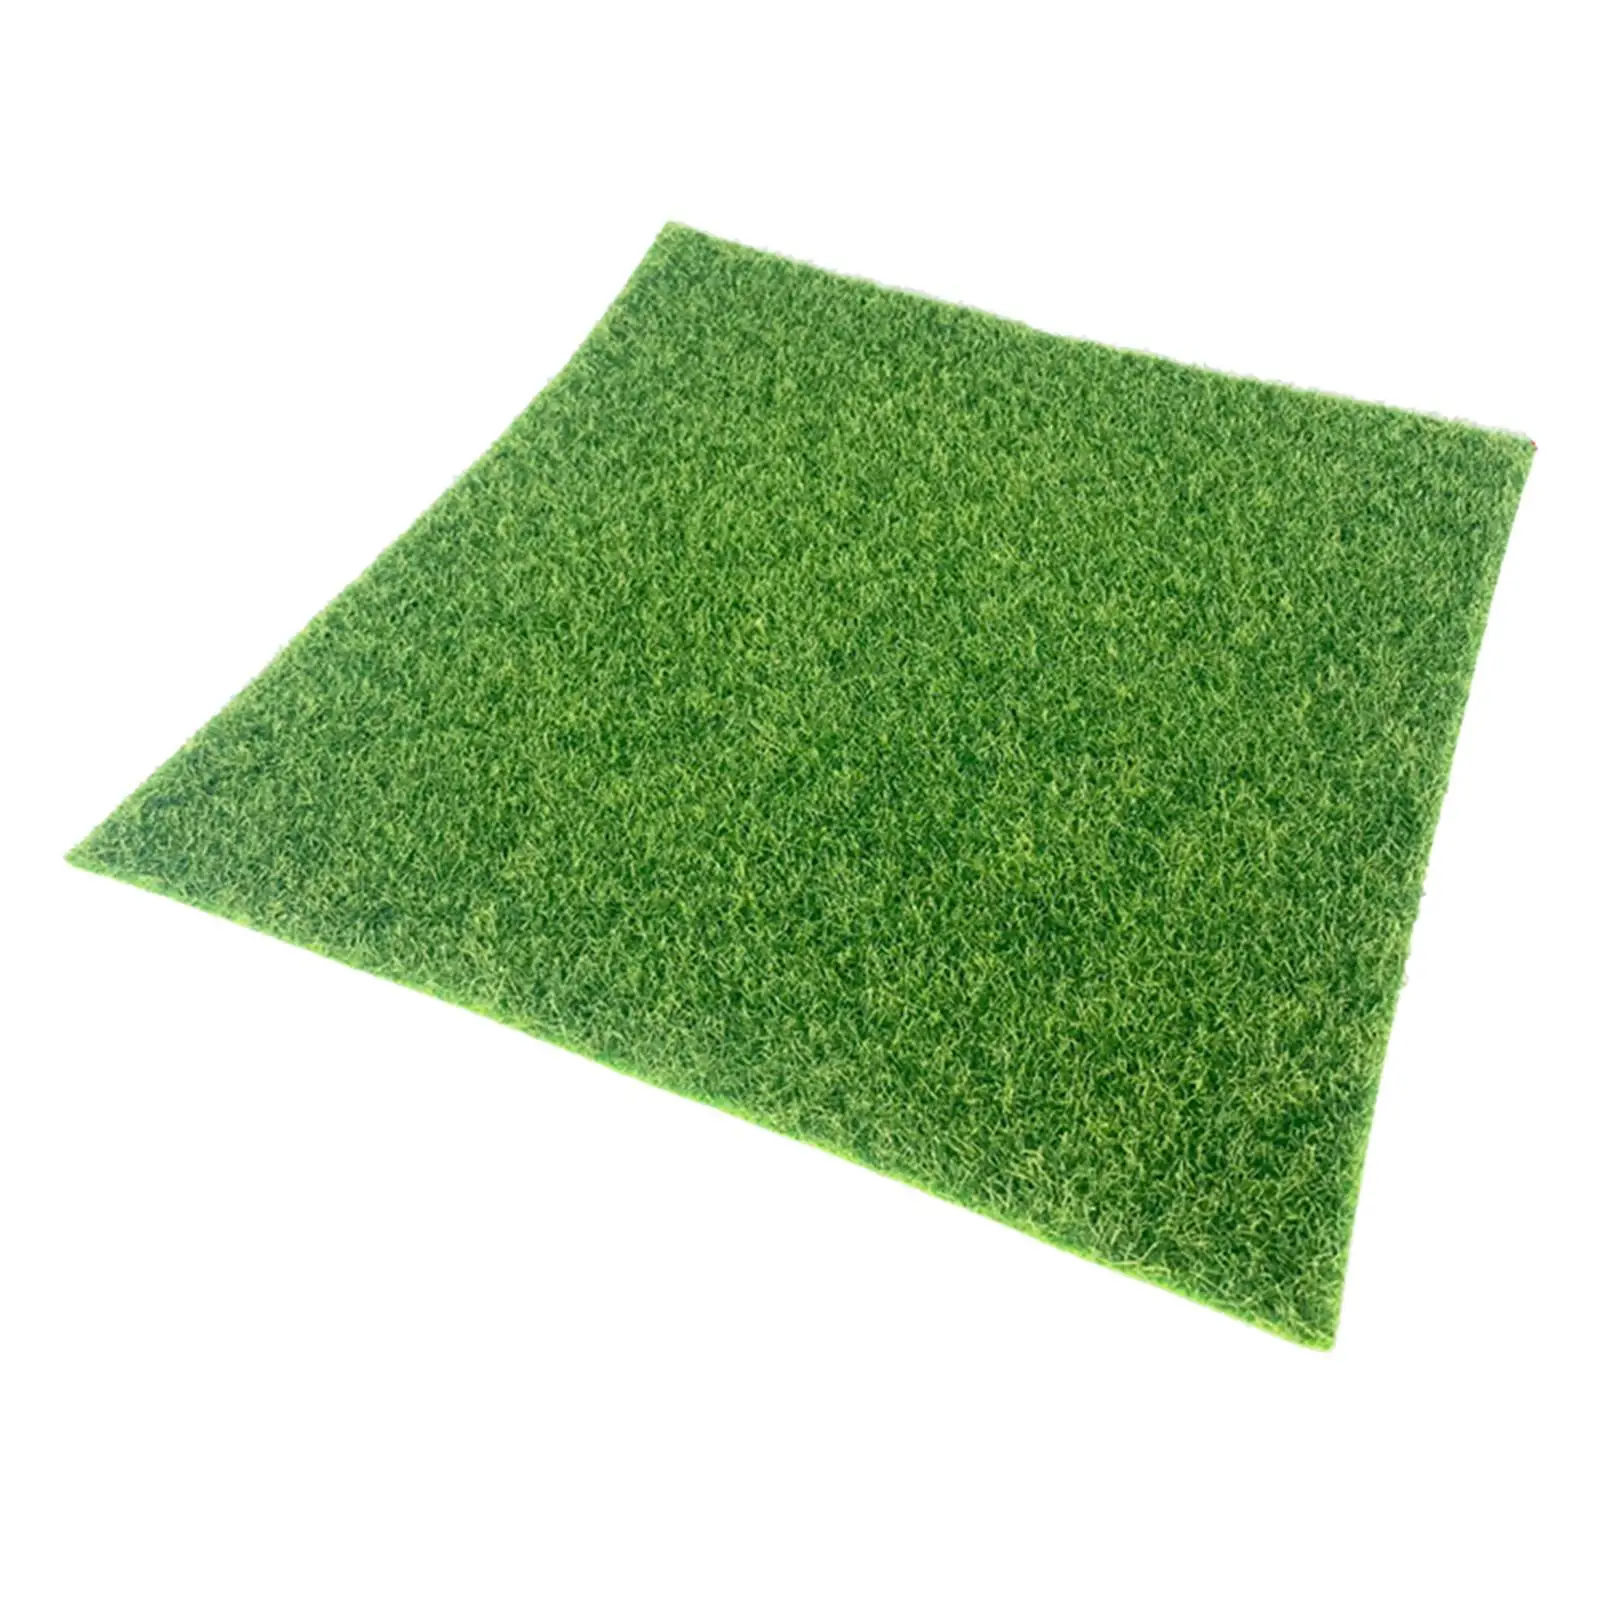 Artificial Grass Mat Dogs training Area Rug Lawn Turf for Sand Table DIY Micro Landscape Home Patio Decoration